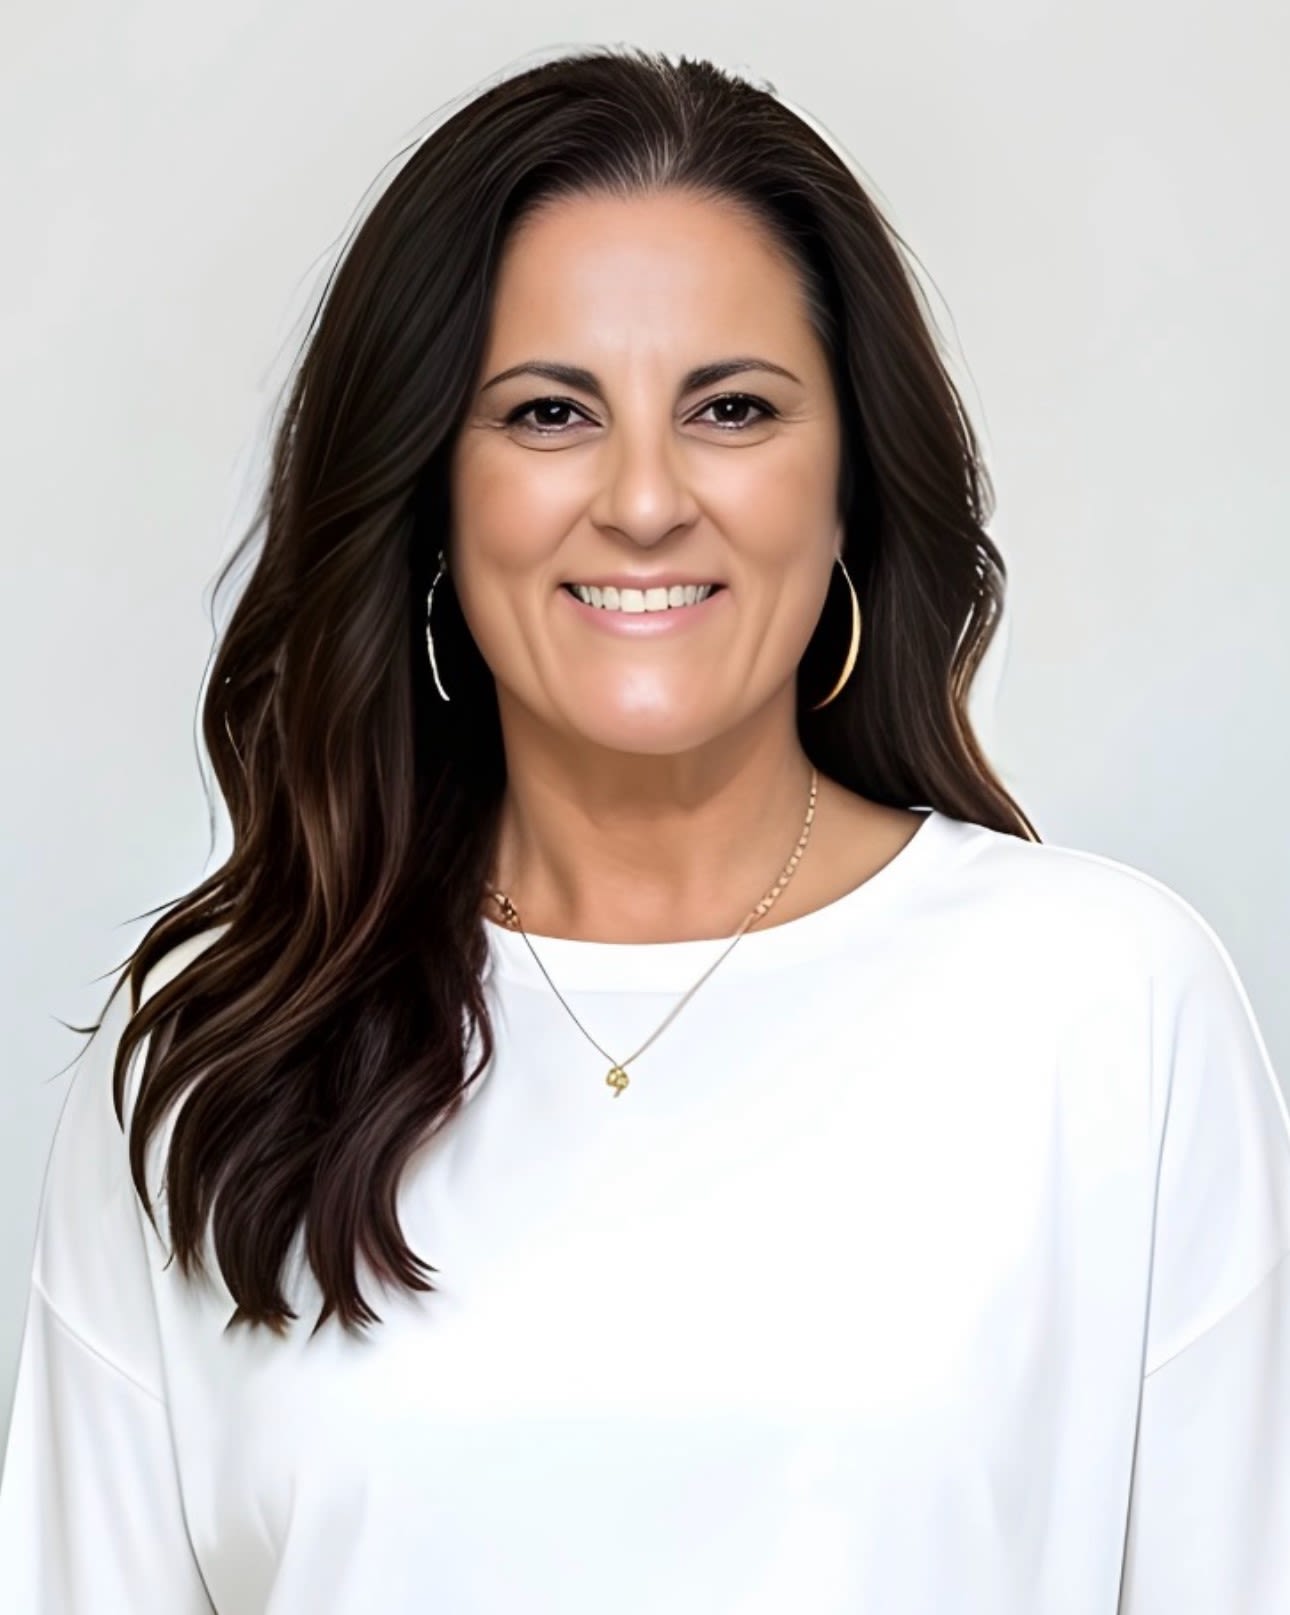 Real estate professional Angela Cugini-Girard joins eXp Realty